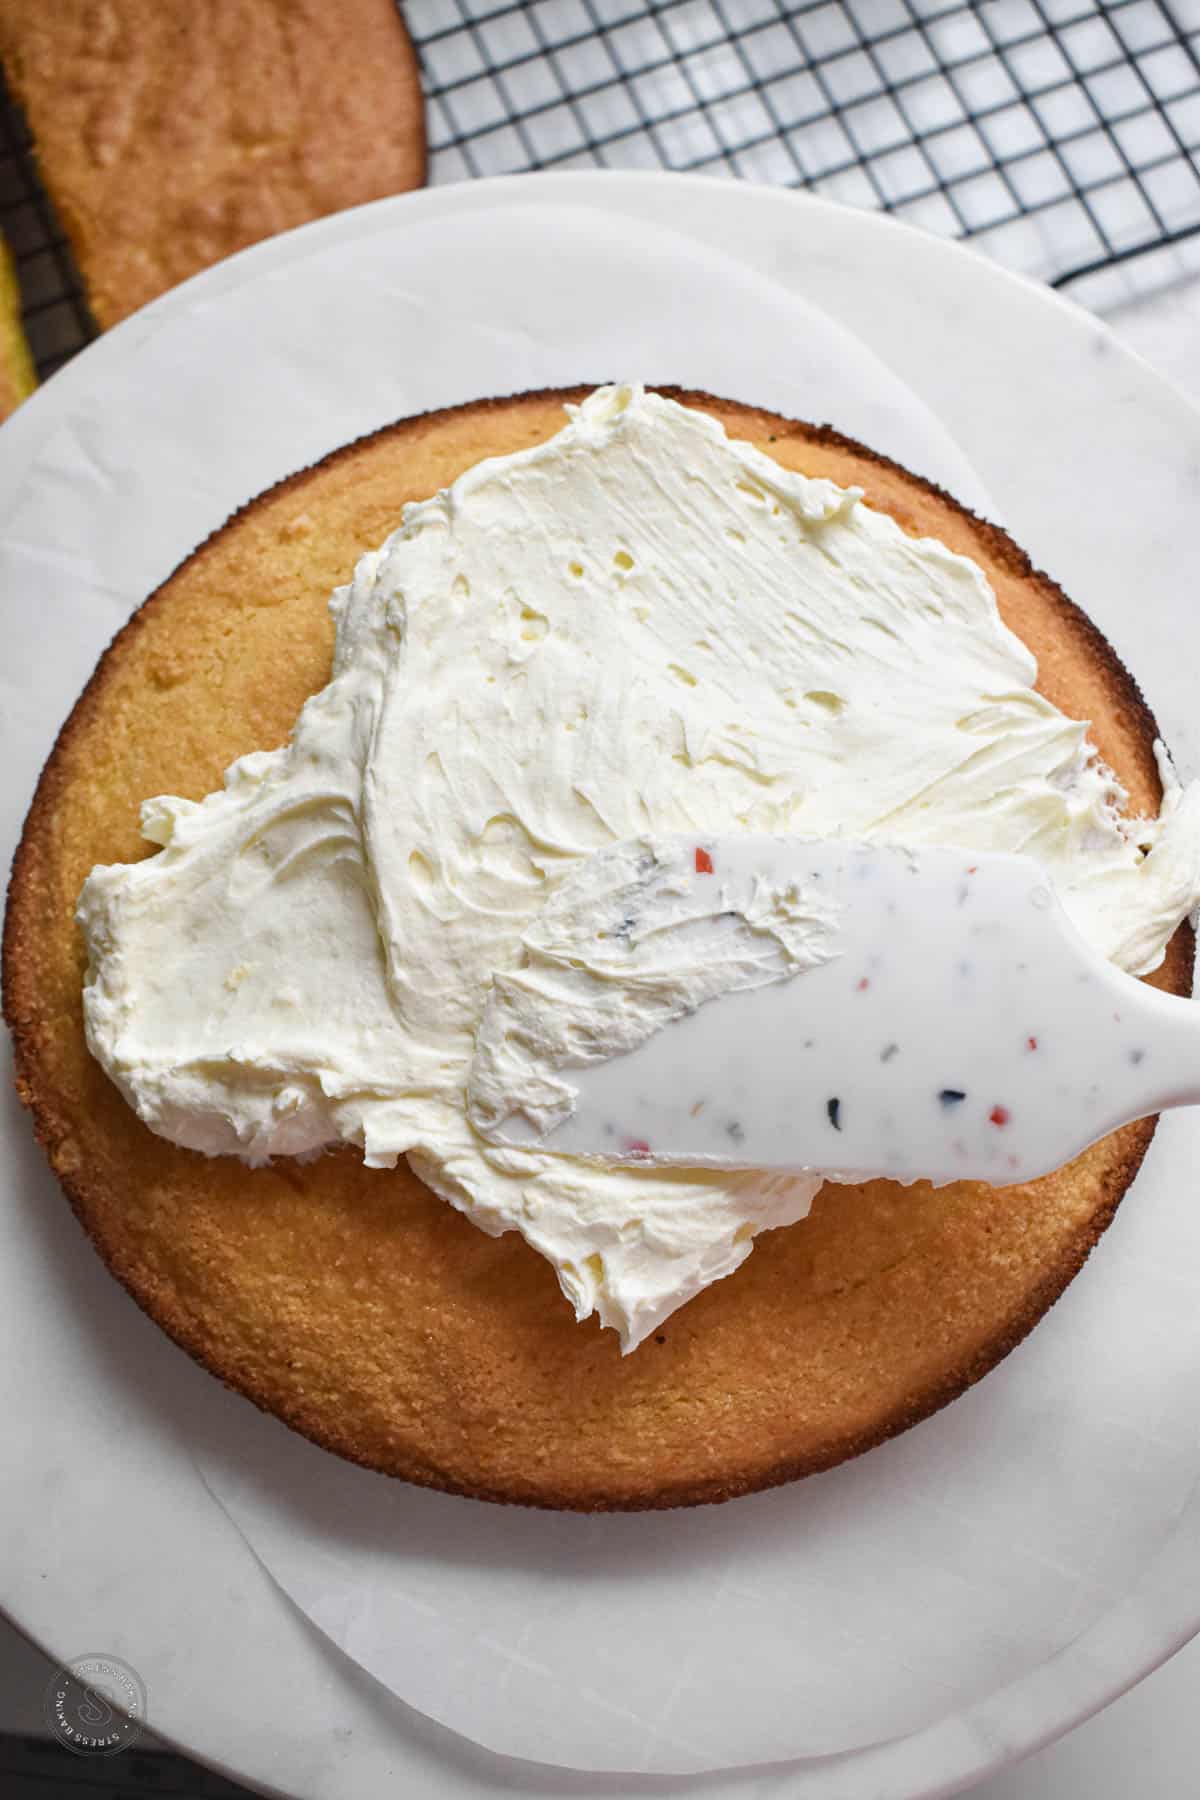 Whipped cream frosting being spread on top of a layer of yellow cake